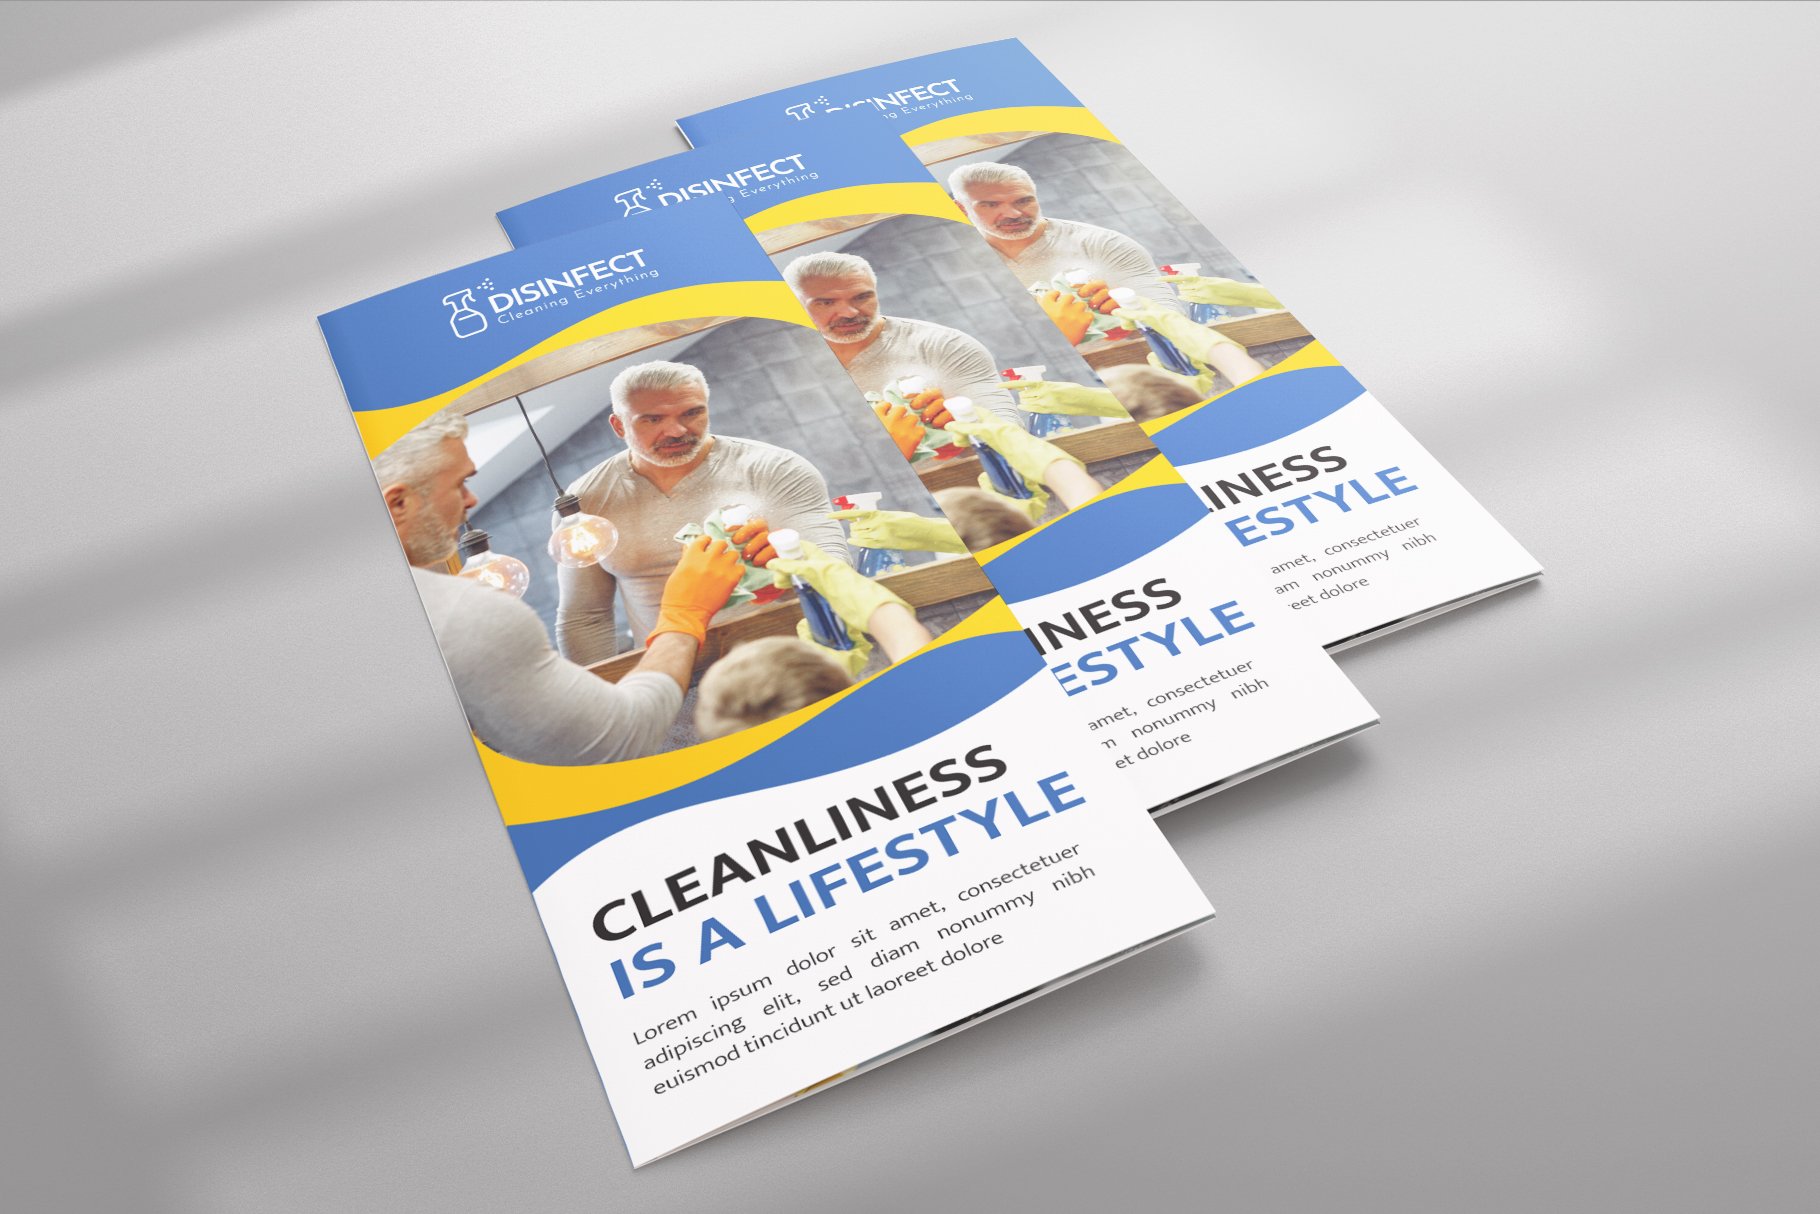 Cleaning Services Trifold Brochure cover image.